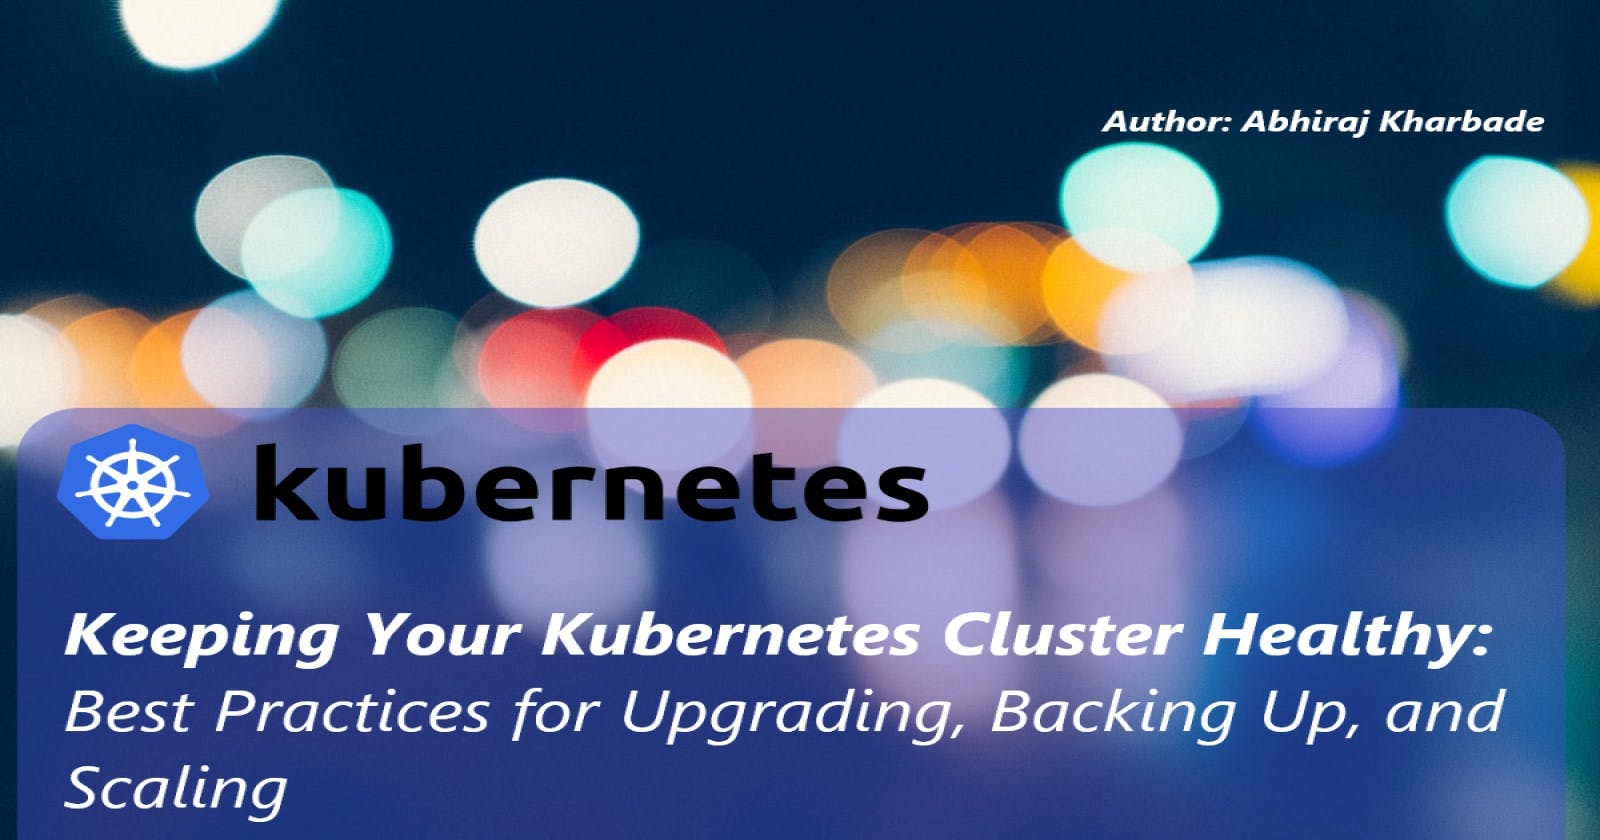 Keeping Your Kubernetes Cluster Healthy: Best Practices for Upgrading, Backing Up, and Scaling